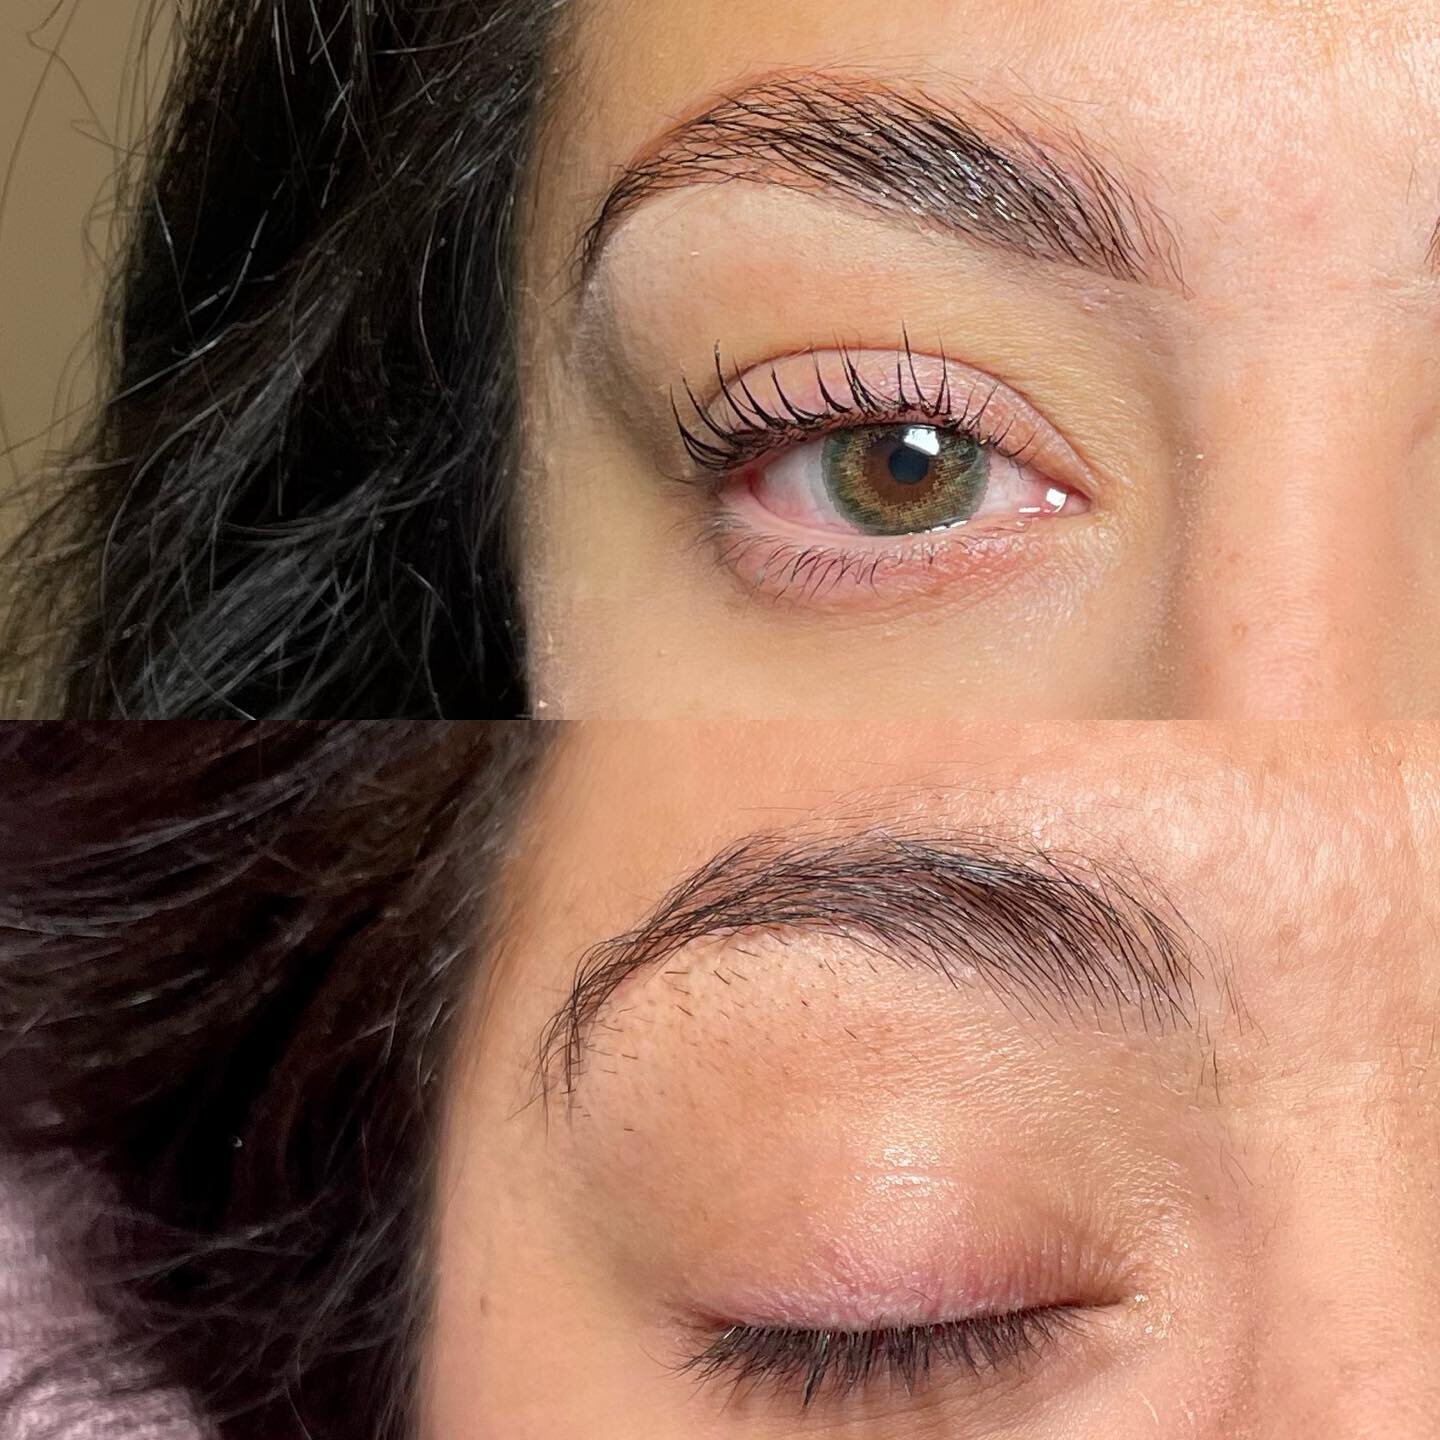 Book your lash and brow lifts at the special rate of $45 for the remainder of the month! 💕 wake up with groomed brows and naturally curled lashes and cut your morning beauty routine in half!
.
Book now via the booking button in bio 💕